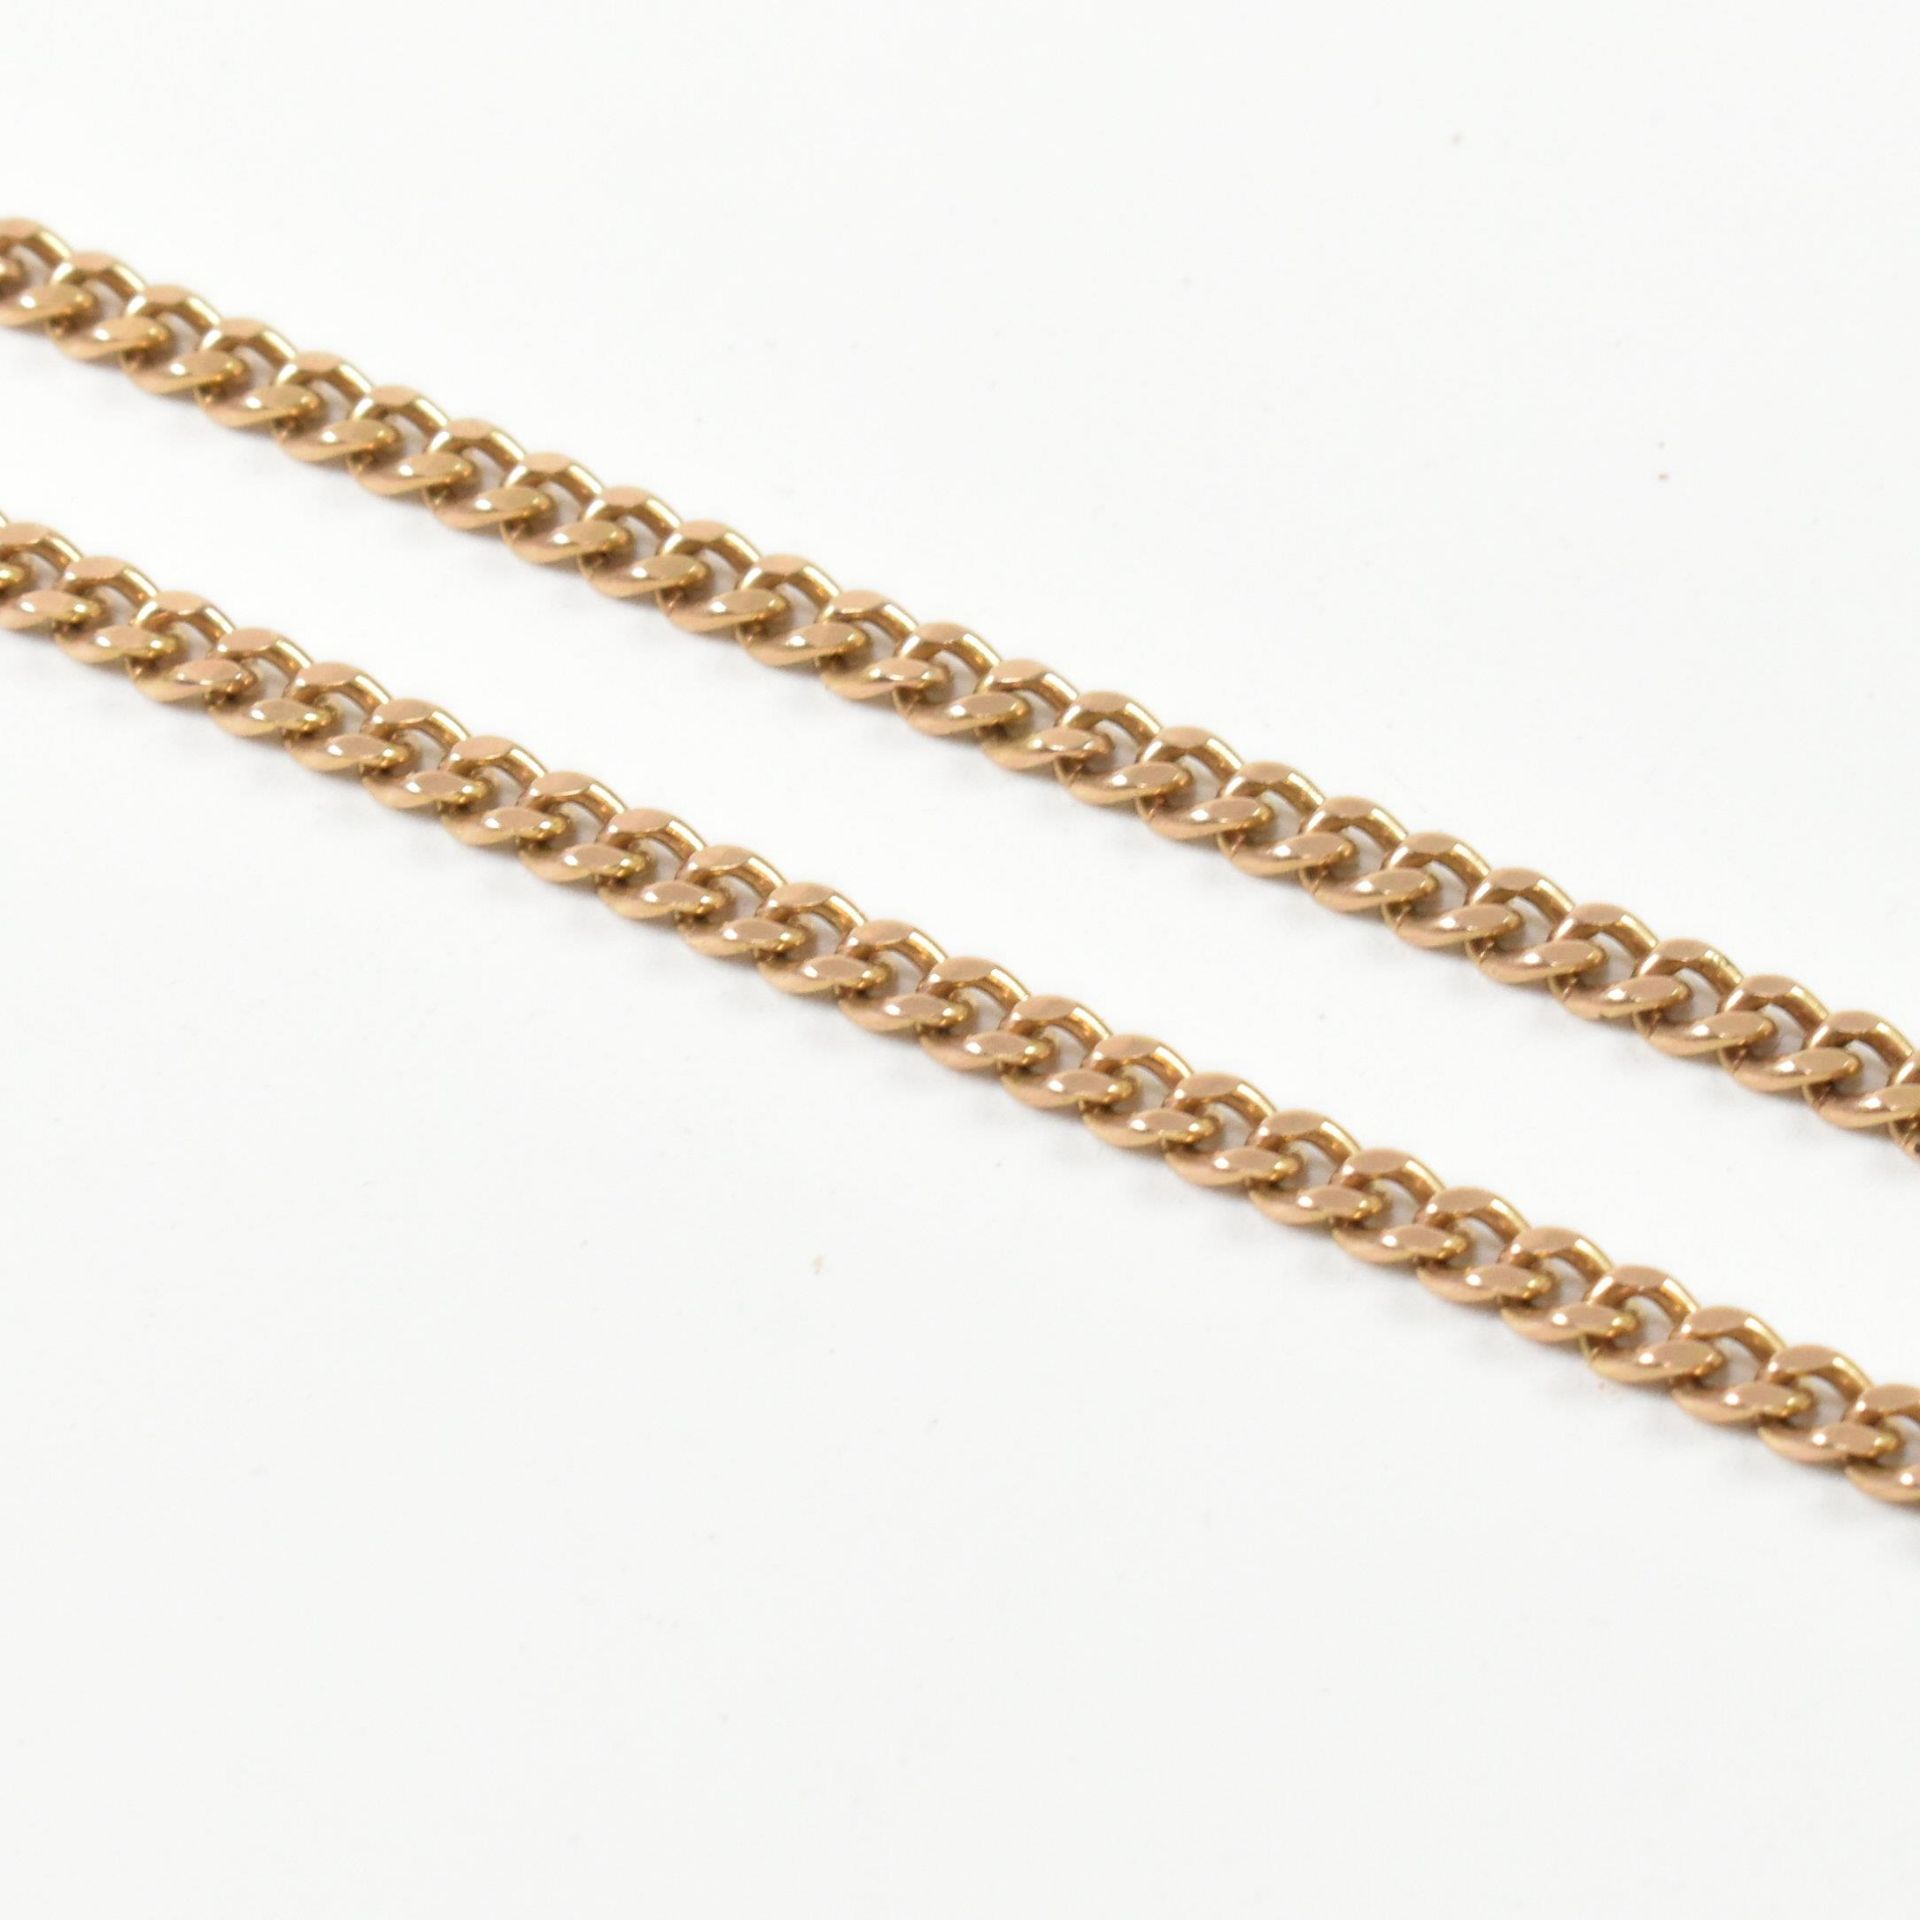 HALLMARKED 9CT GOLD CURB LINK CHAIN NECKLACE - Image 3 of 6